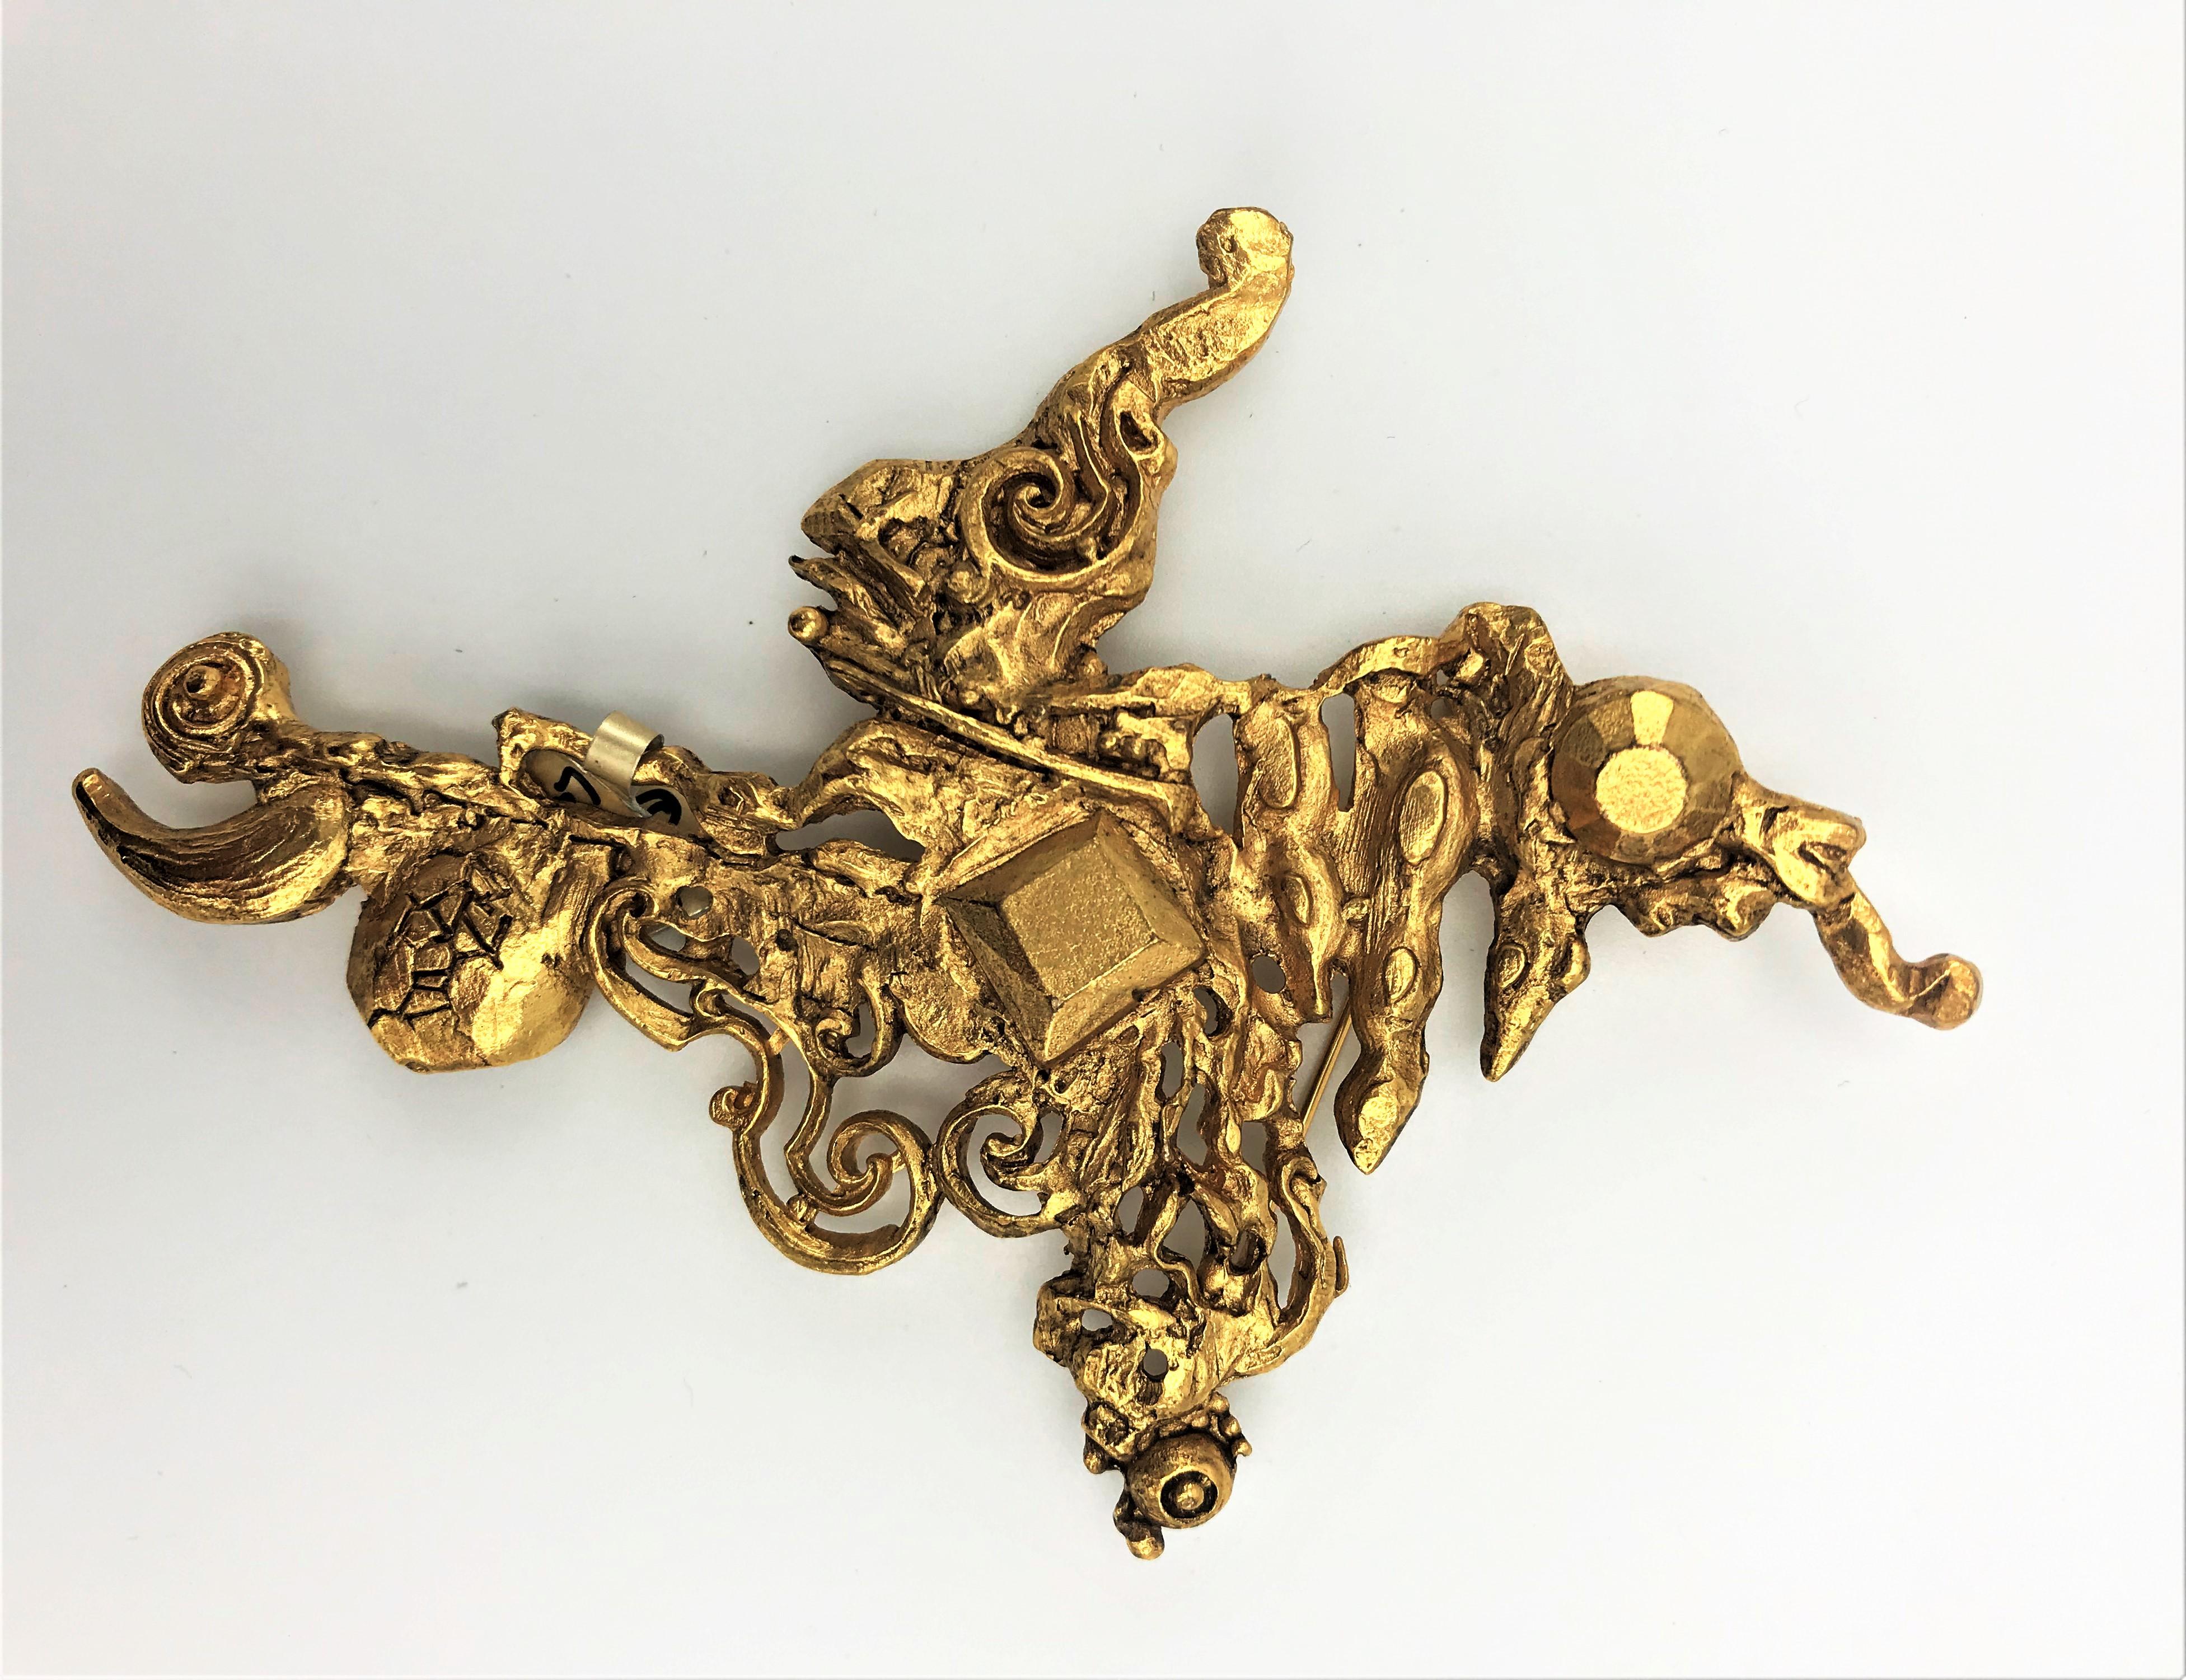  Christian Lacroix Paris stylized cross brooch gold plated 1980s For Sale 2